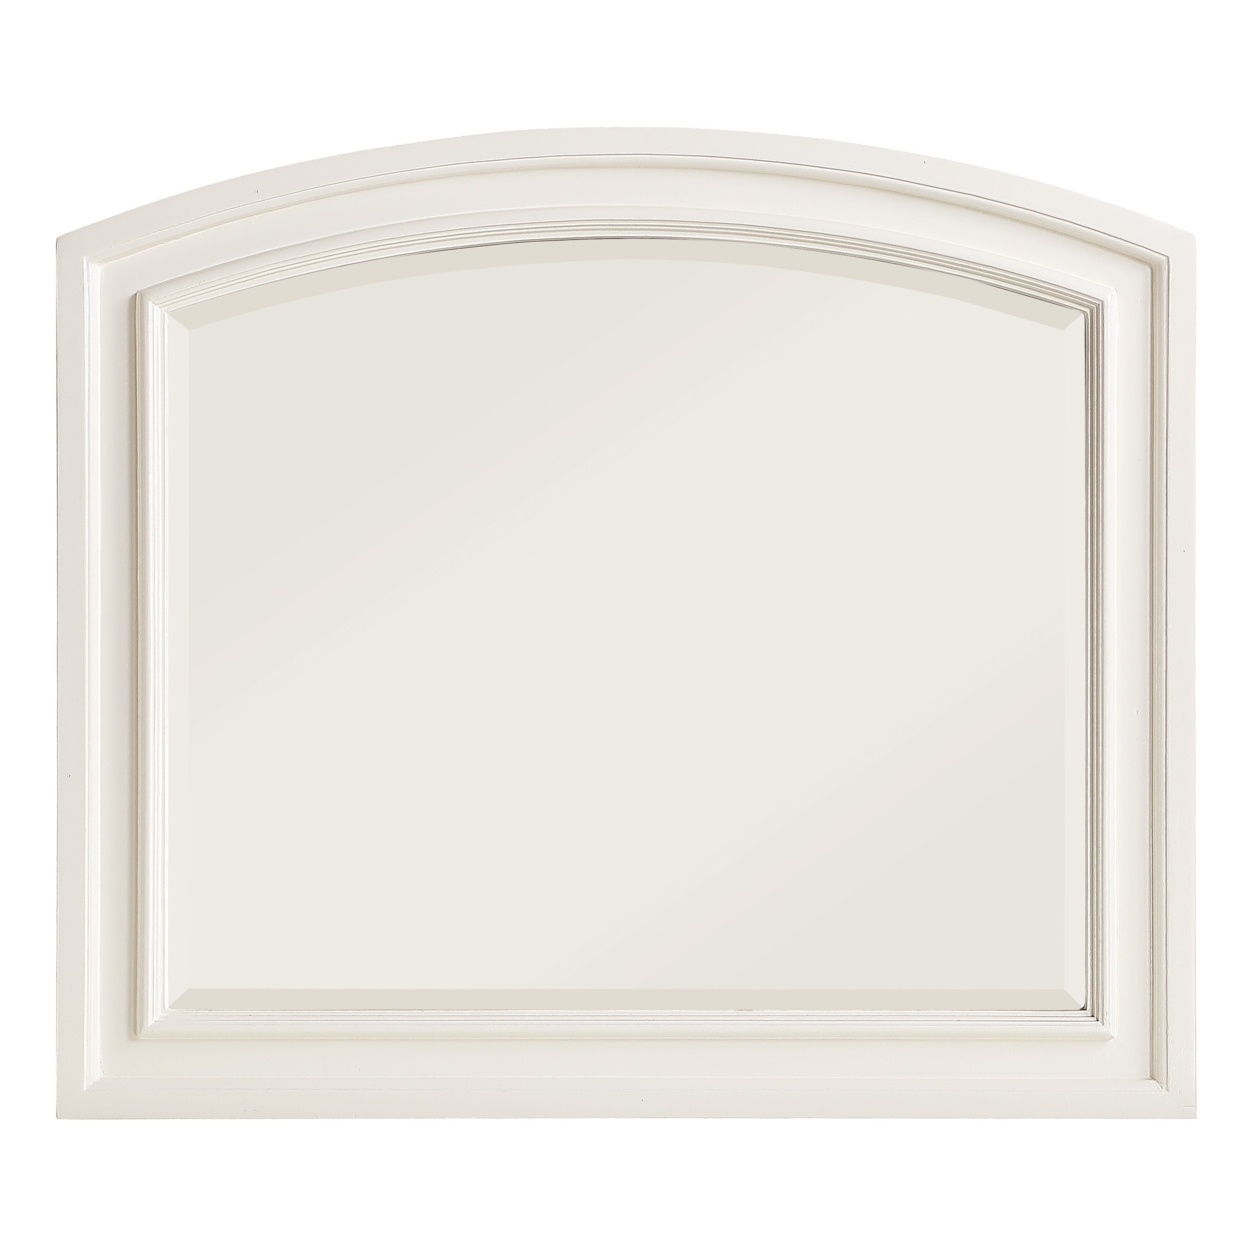 Wooden Mirror With Raised Edges And Curved Top, White- Saltoro Sherpi